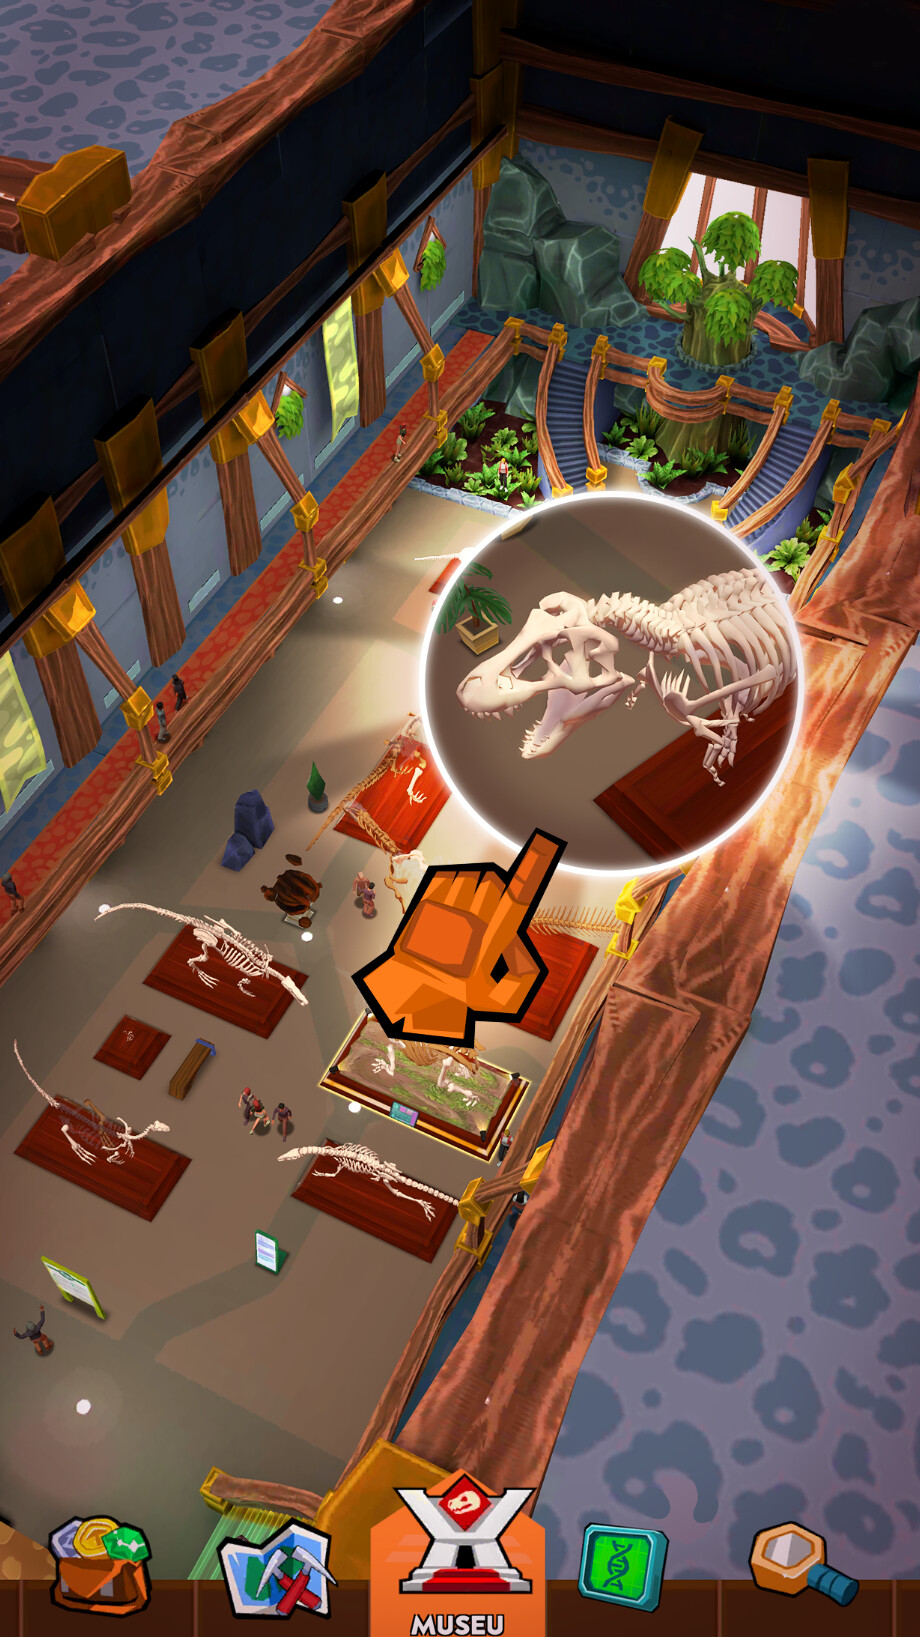 Dino Quest: Dig Dinosaur Game - Apps on Google Play